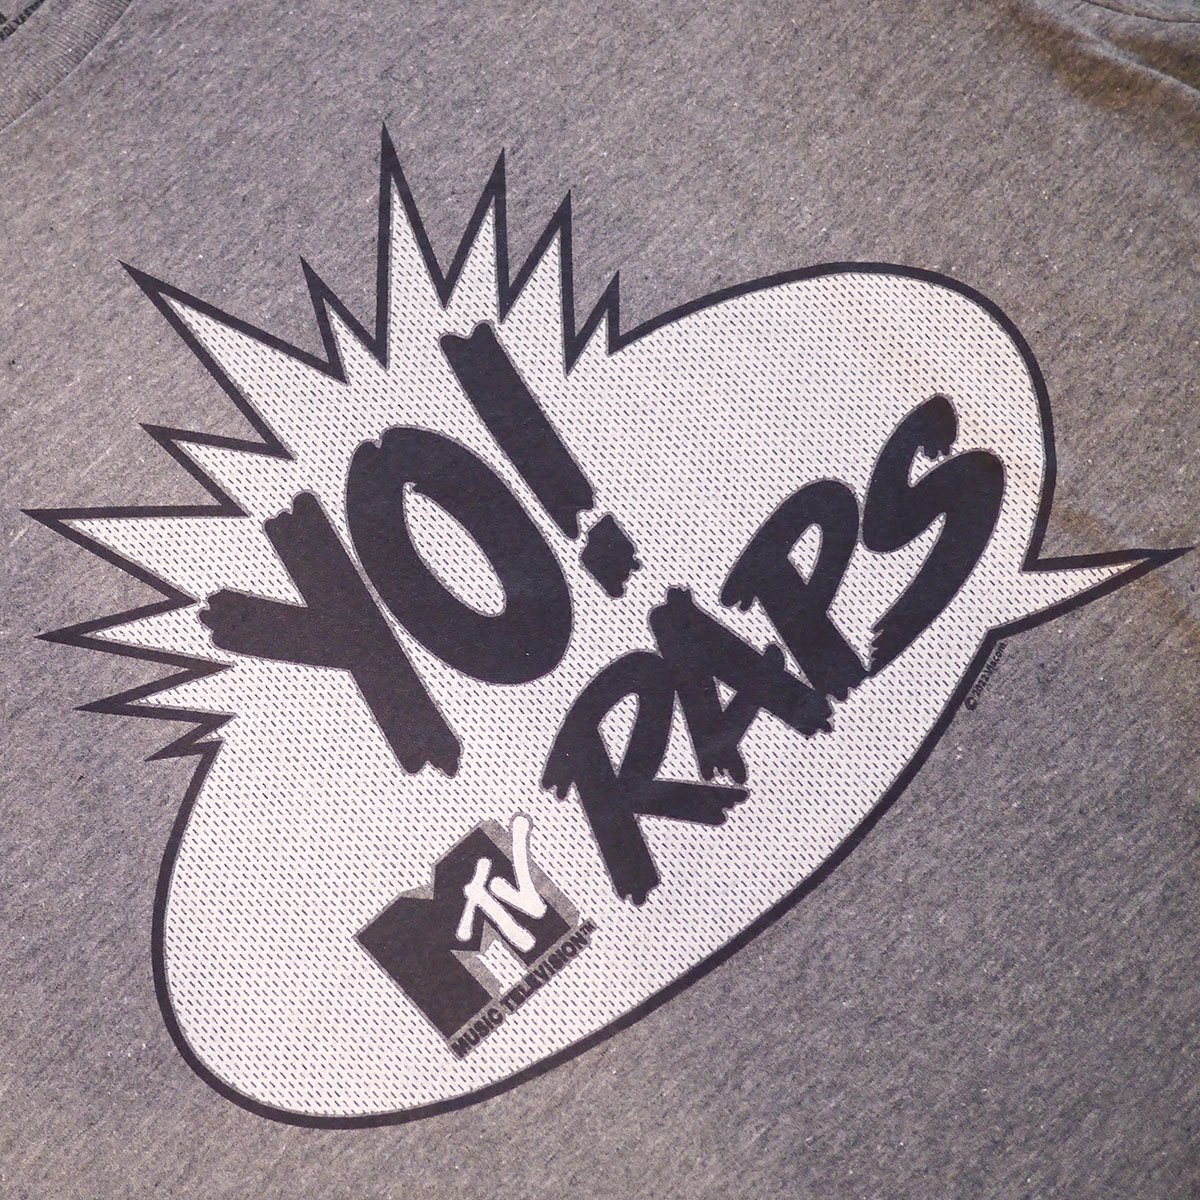 Fedup | HIPHOP WEAR | <img class='new_mark_img1' src='https://img.shop-pro.jp/img/new/icons6.gif' style='border:none;display:inline;margin:0px;padding:0px;width:auto;' />YO! MTV RAPS 